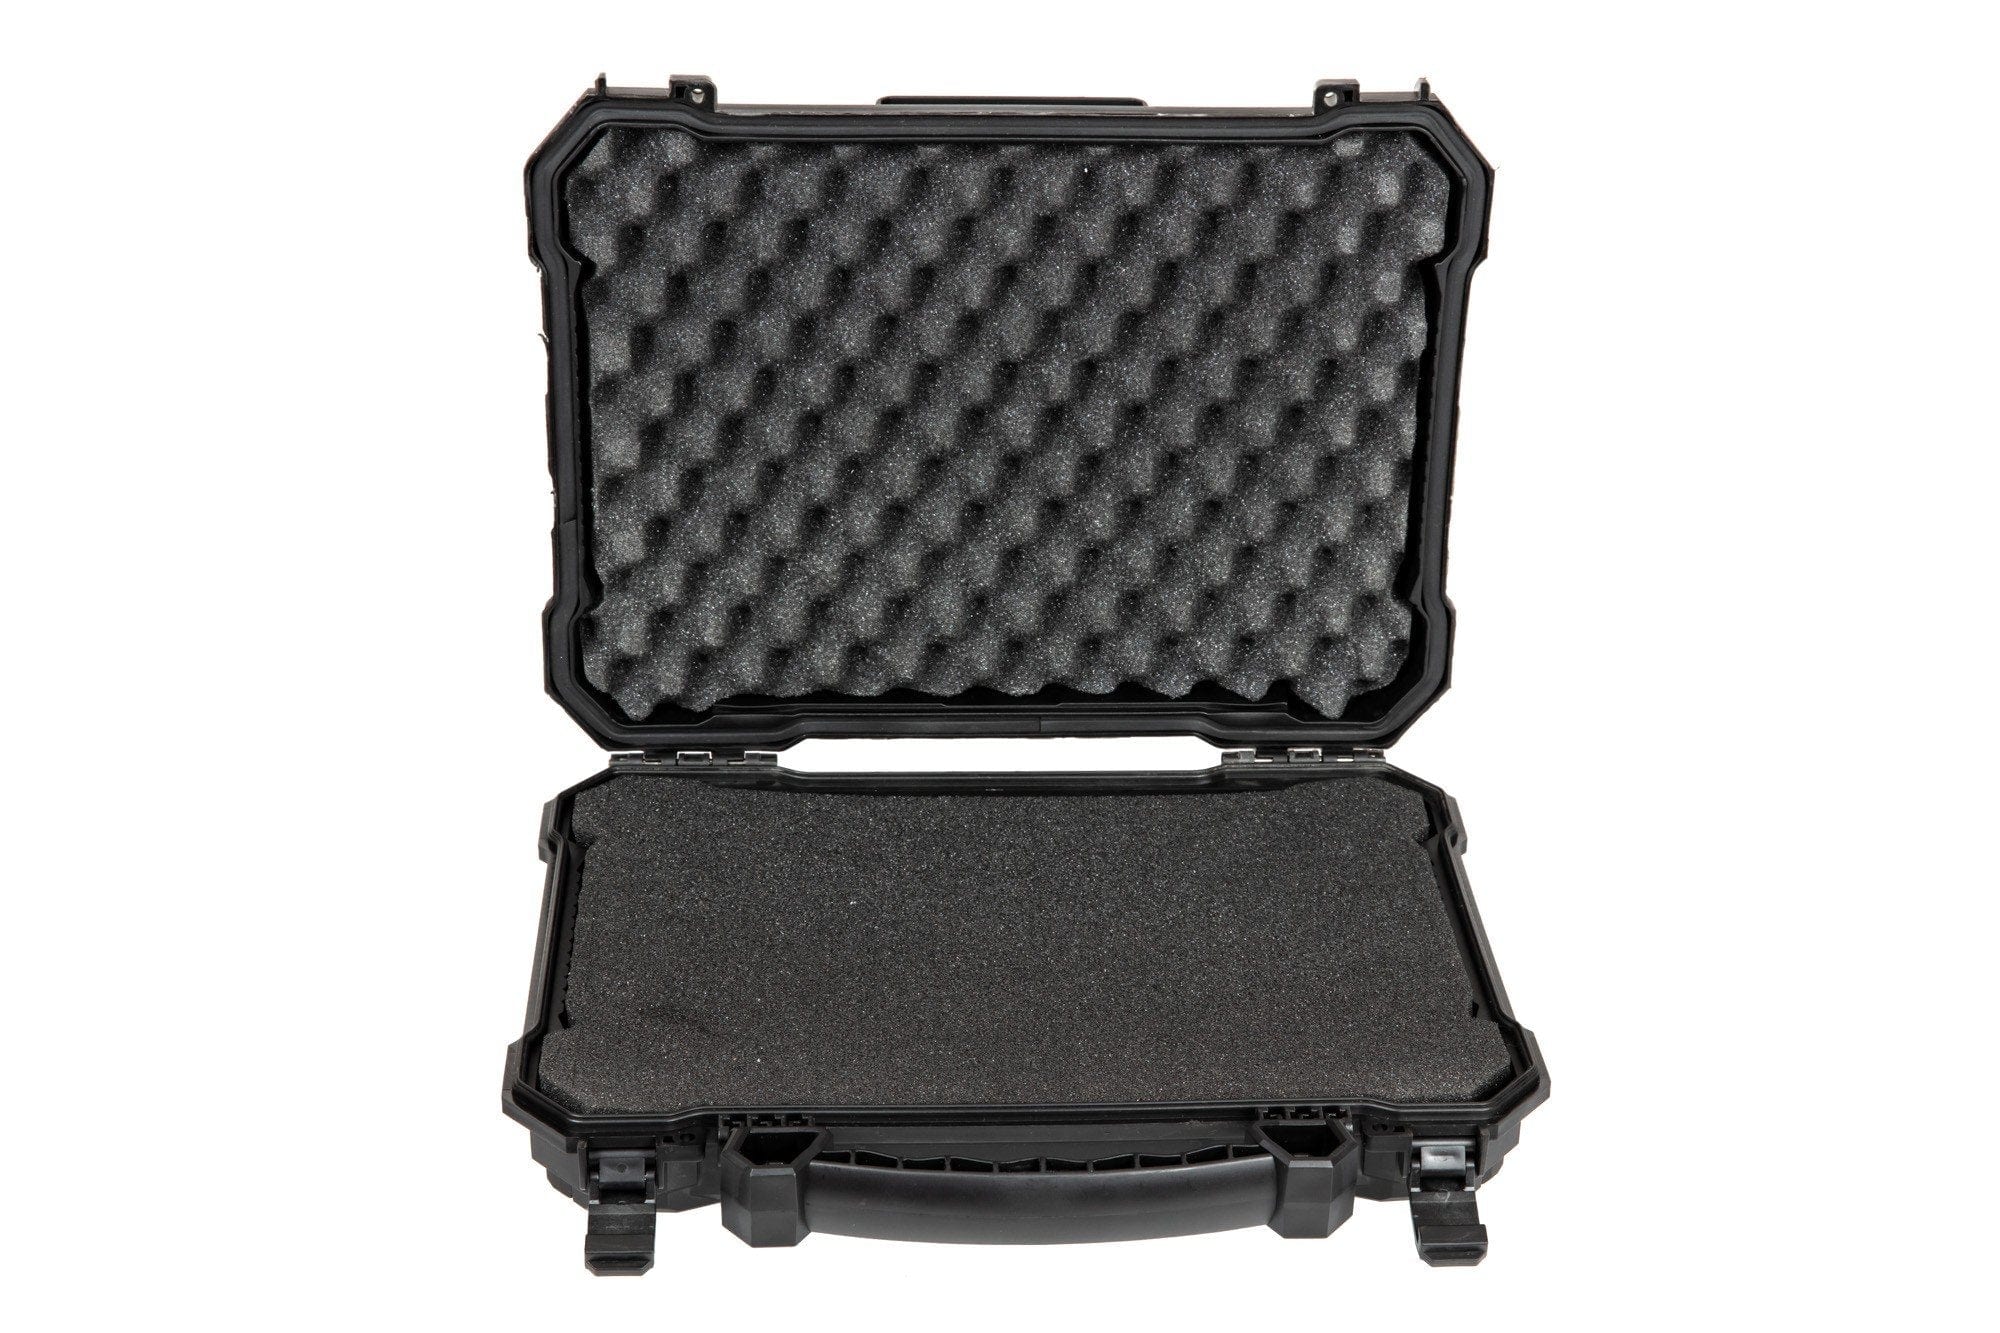 Specna Arms Pistol Case - 31.5cm by Specna Arms on Airsoft Mania Europe